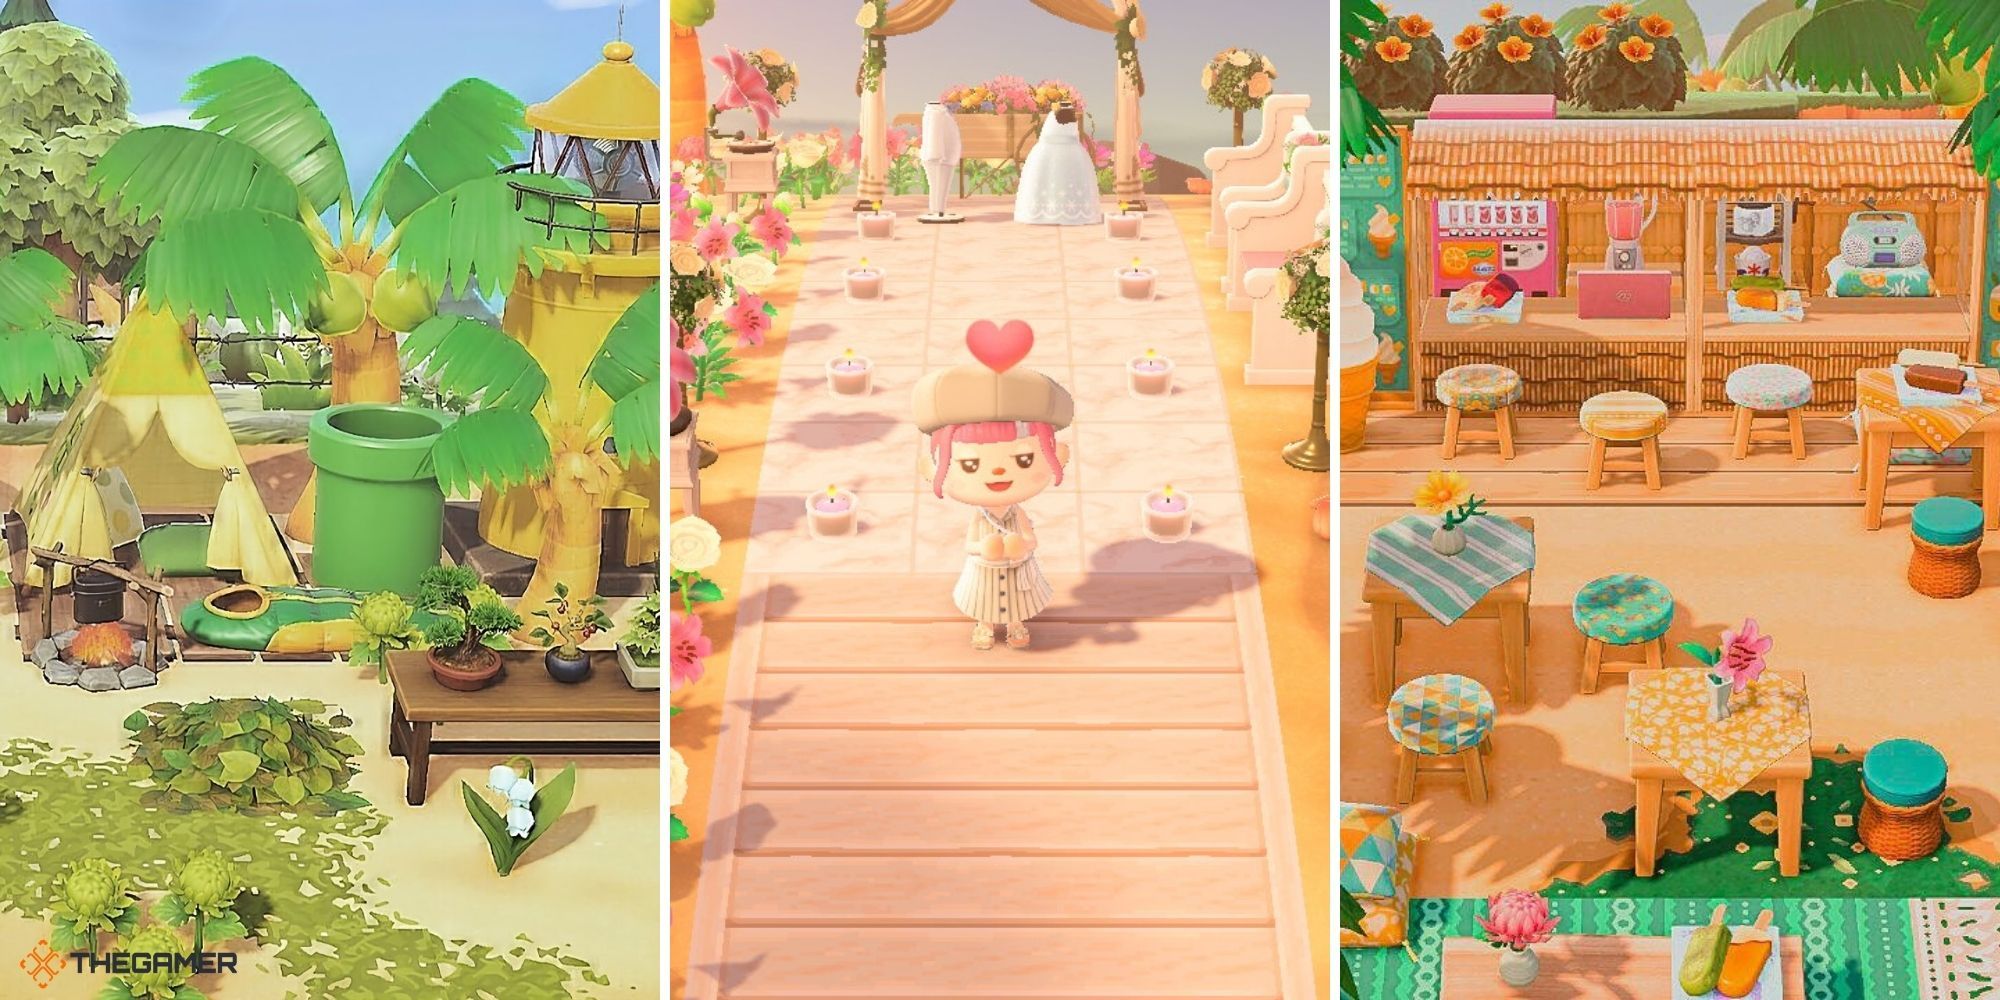 Inspiring animal crossing decorating ideas For Your Virtual Home Design